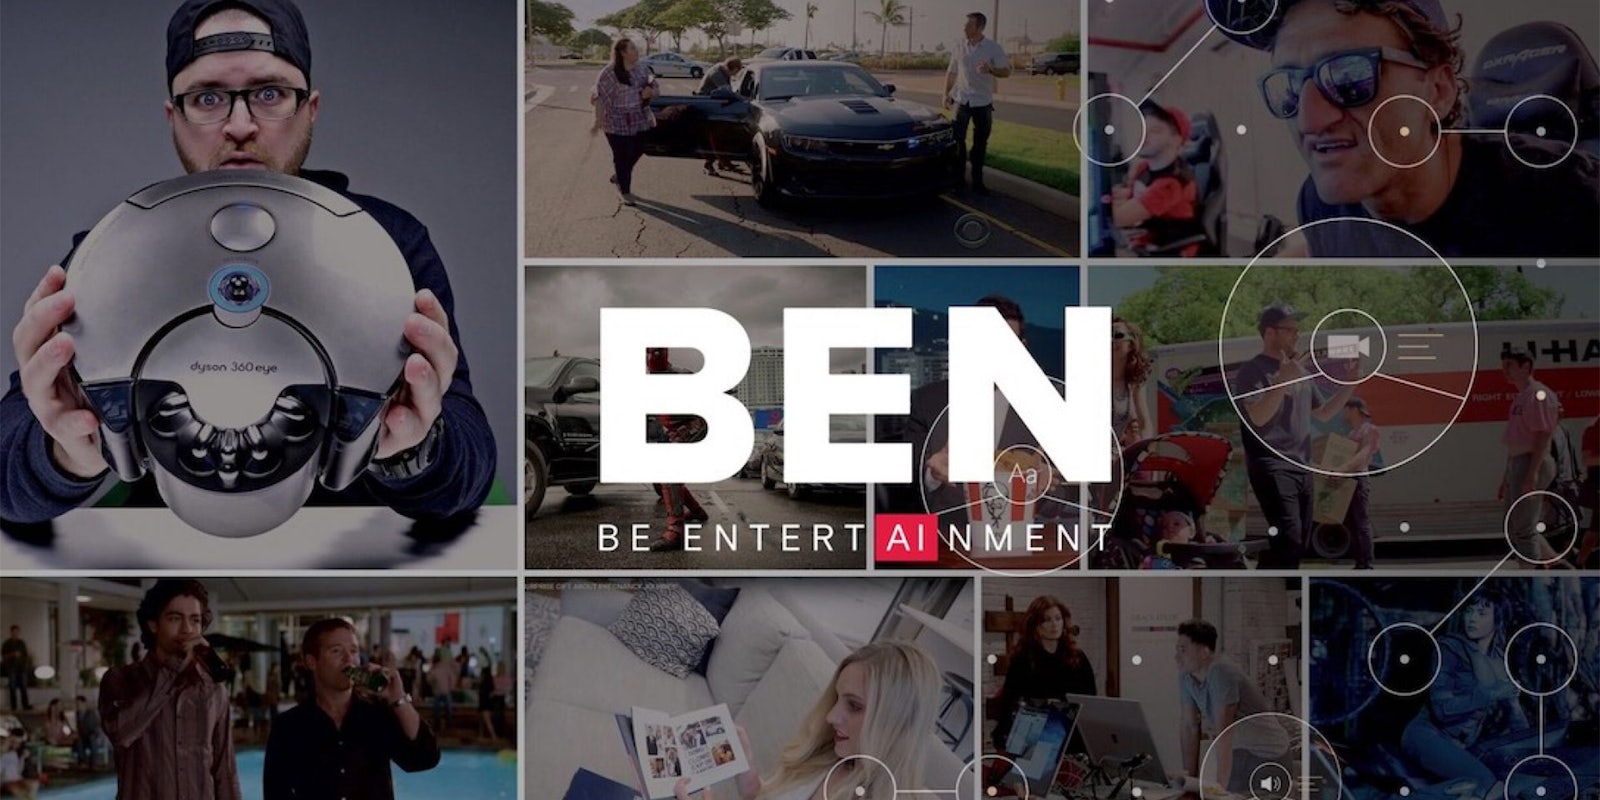 BEN Be Entertainment with photos of man holding device, people near car, gamers, people with a U-haul, men drinking at pool, woman reading on couch, people looking at monitors, woman posing